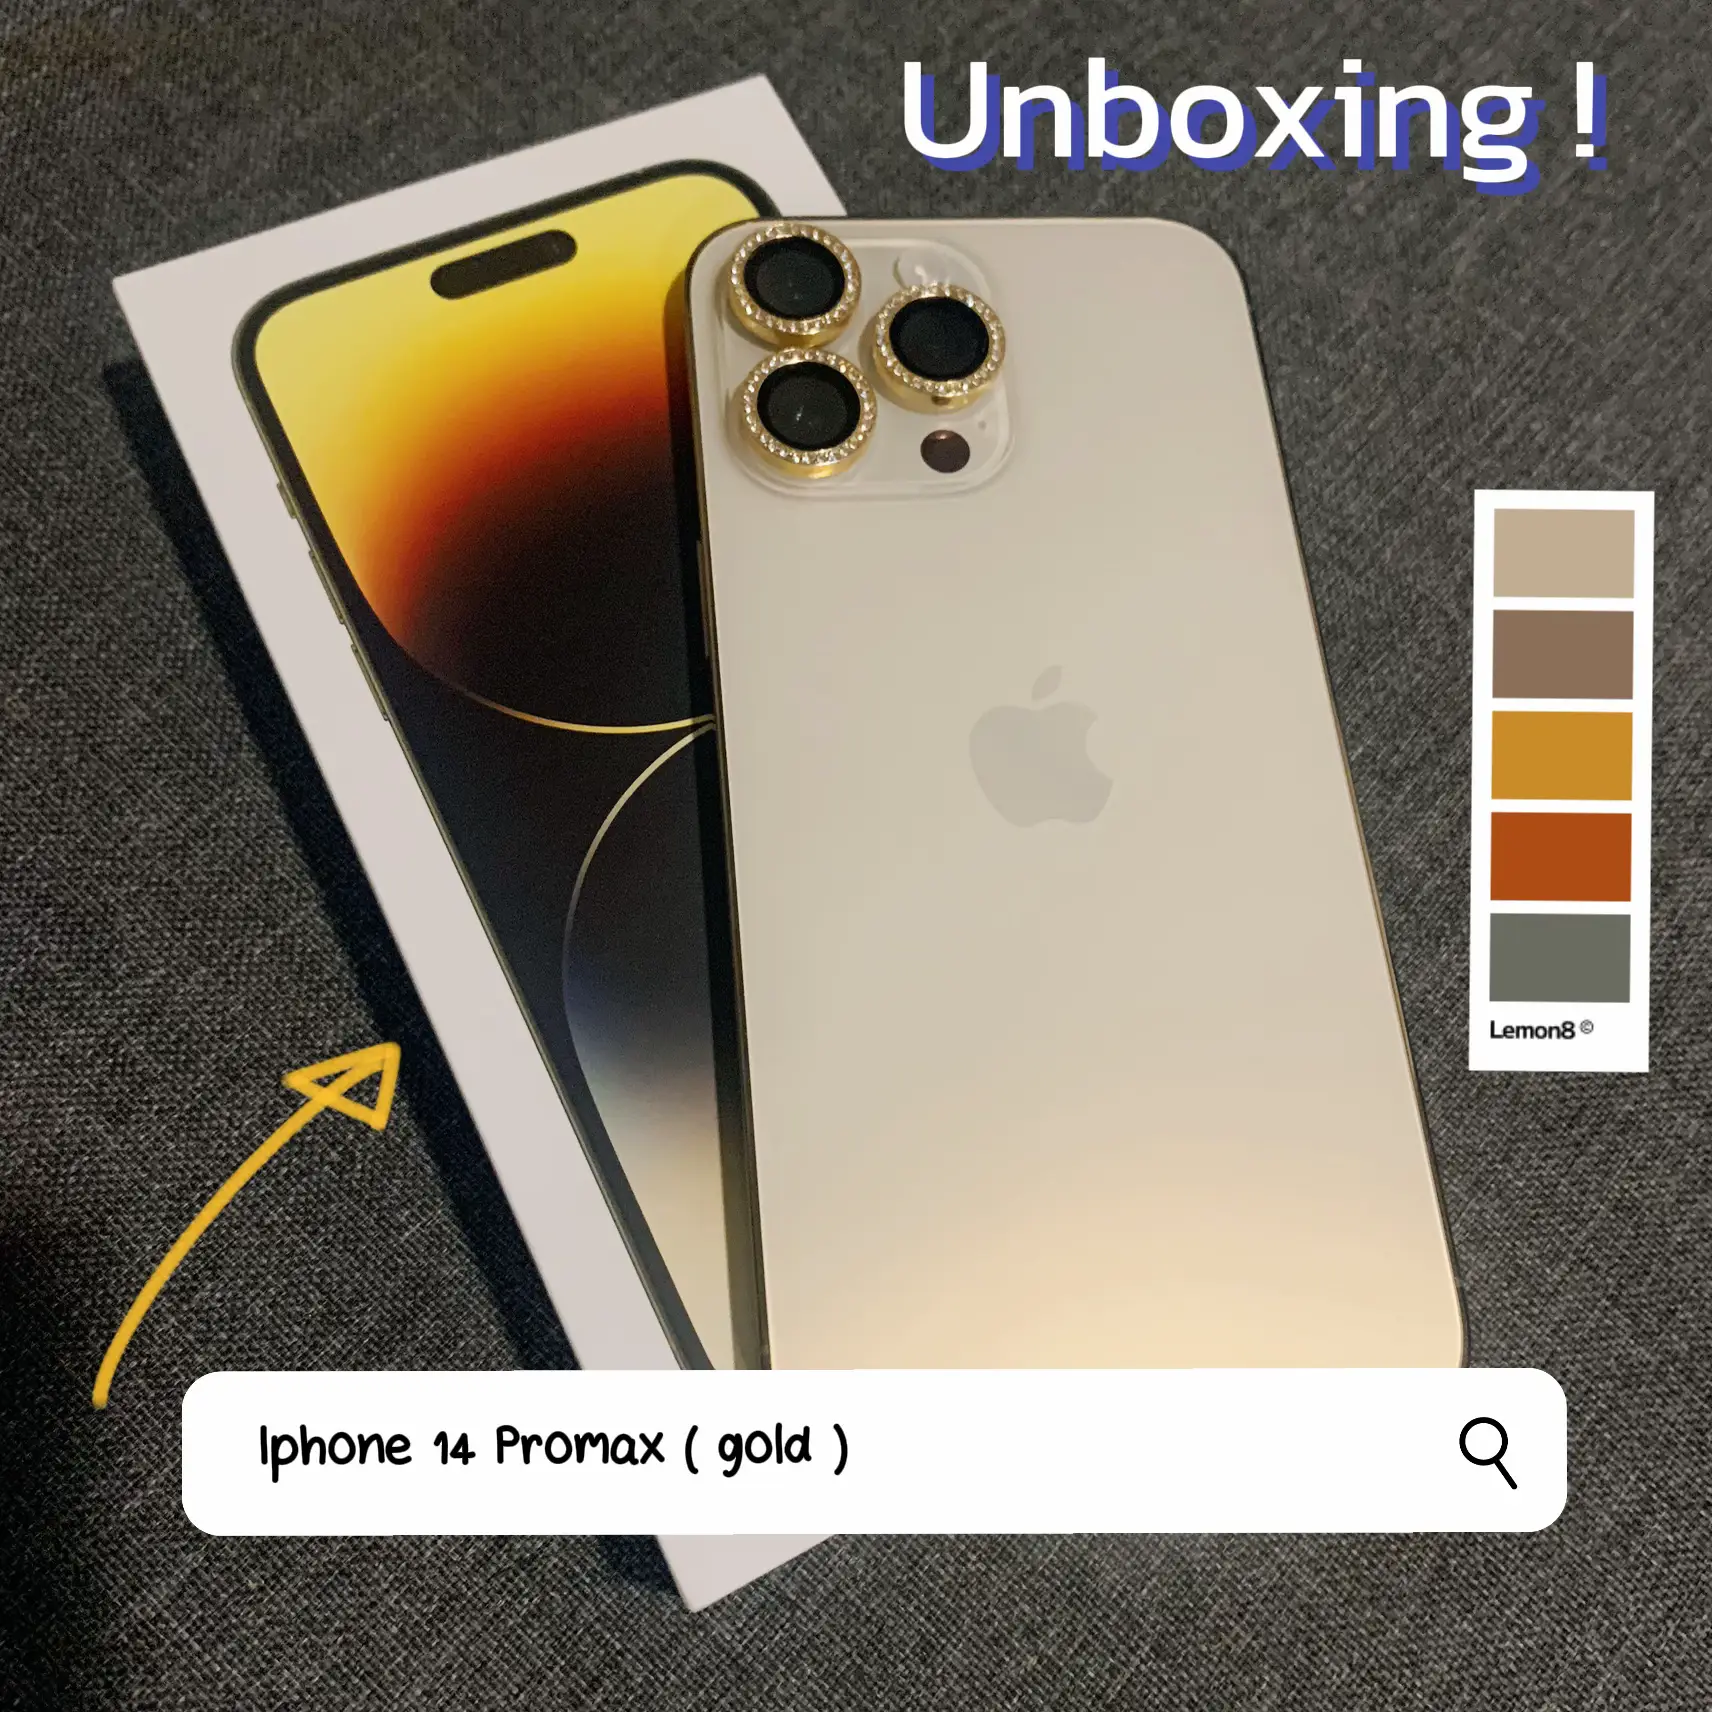 This is Apple iphone 14 pro gold mini phone unboxing part 14 